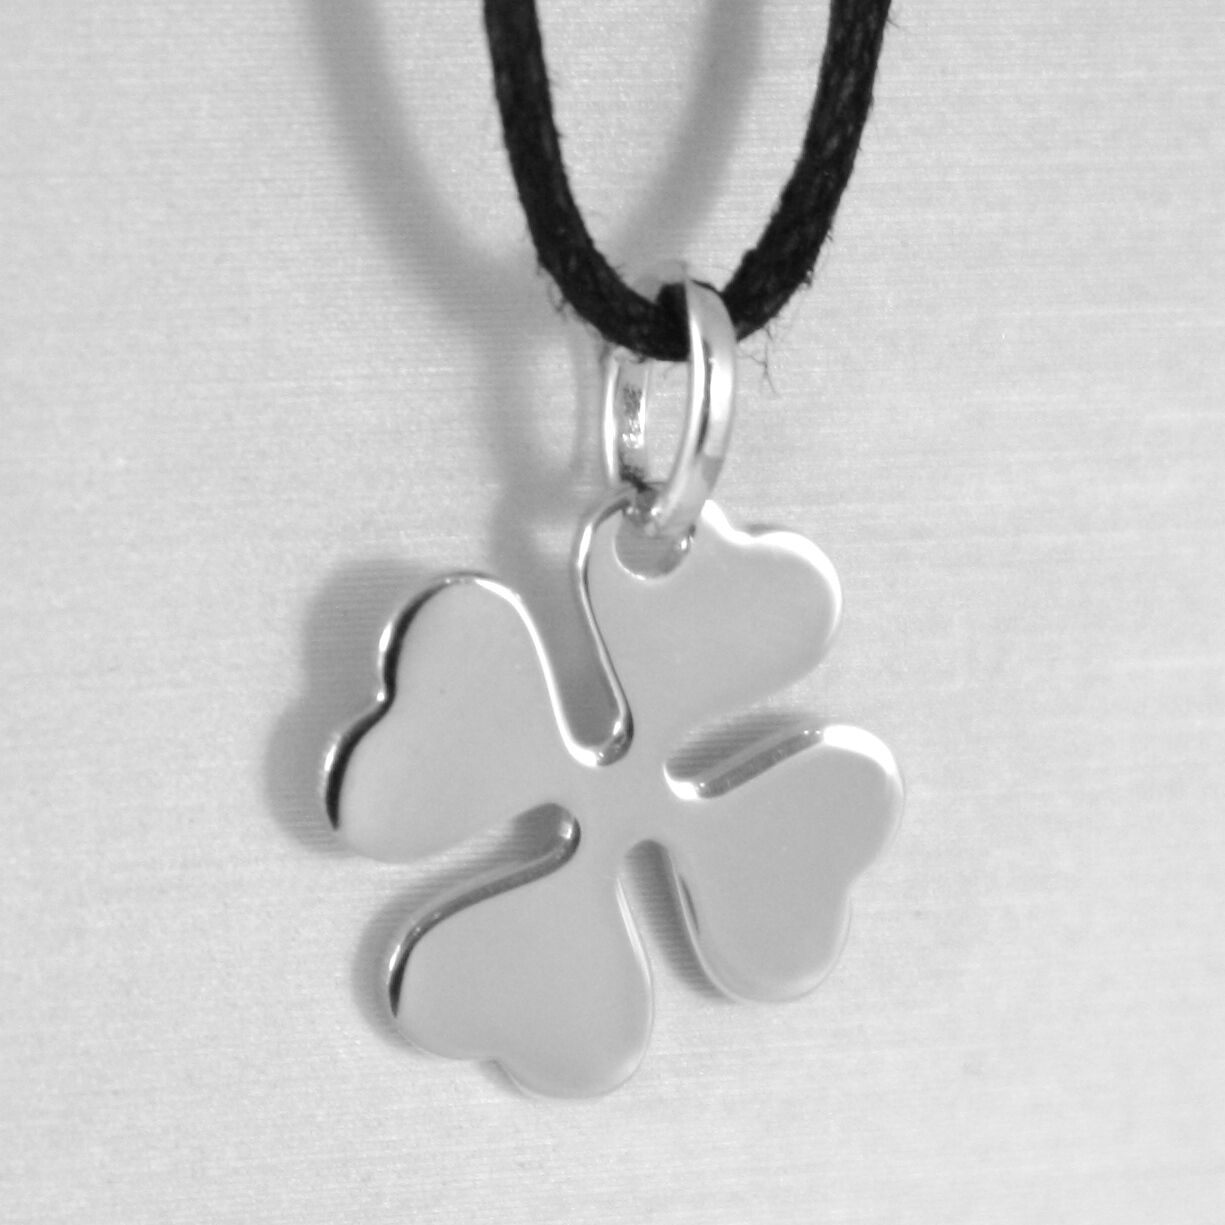 18K Gold Four Leaf Clover Luck Necklace Yellow Gold